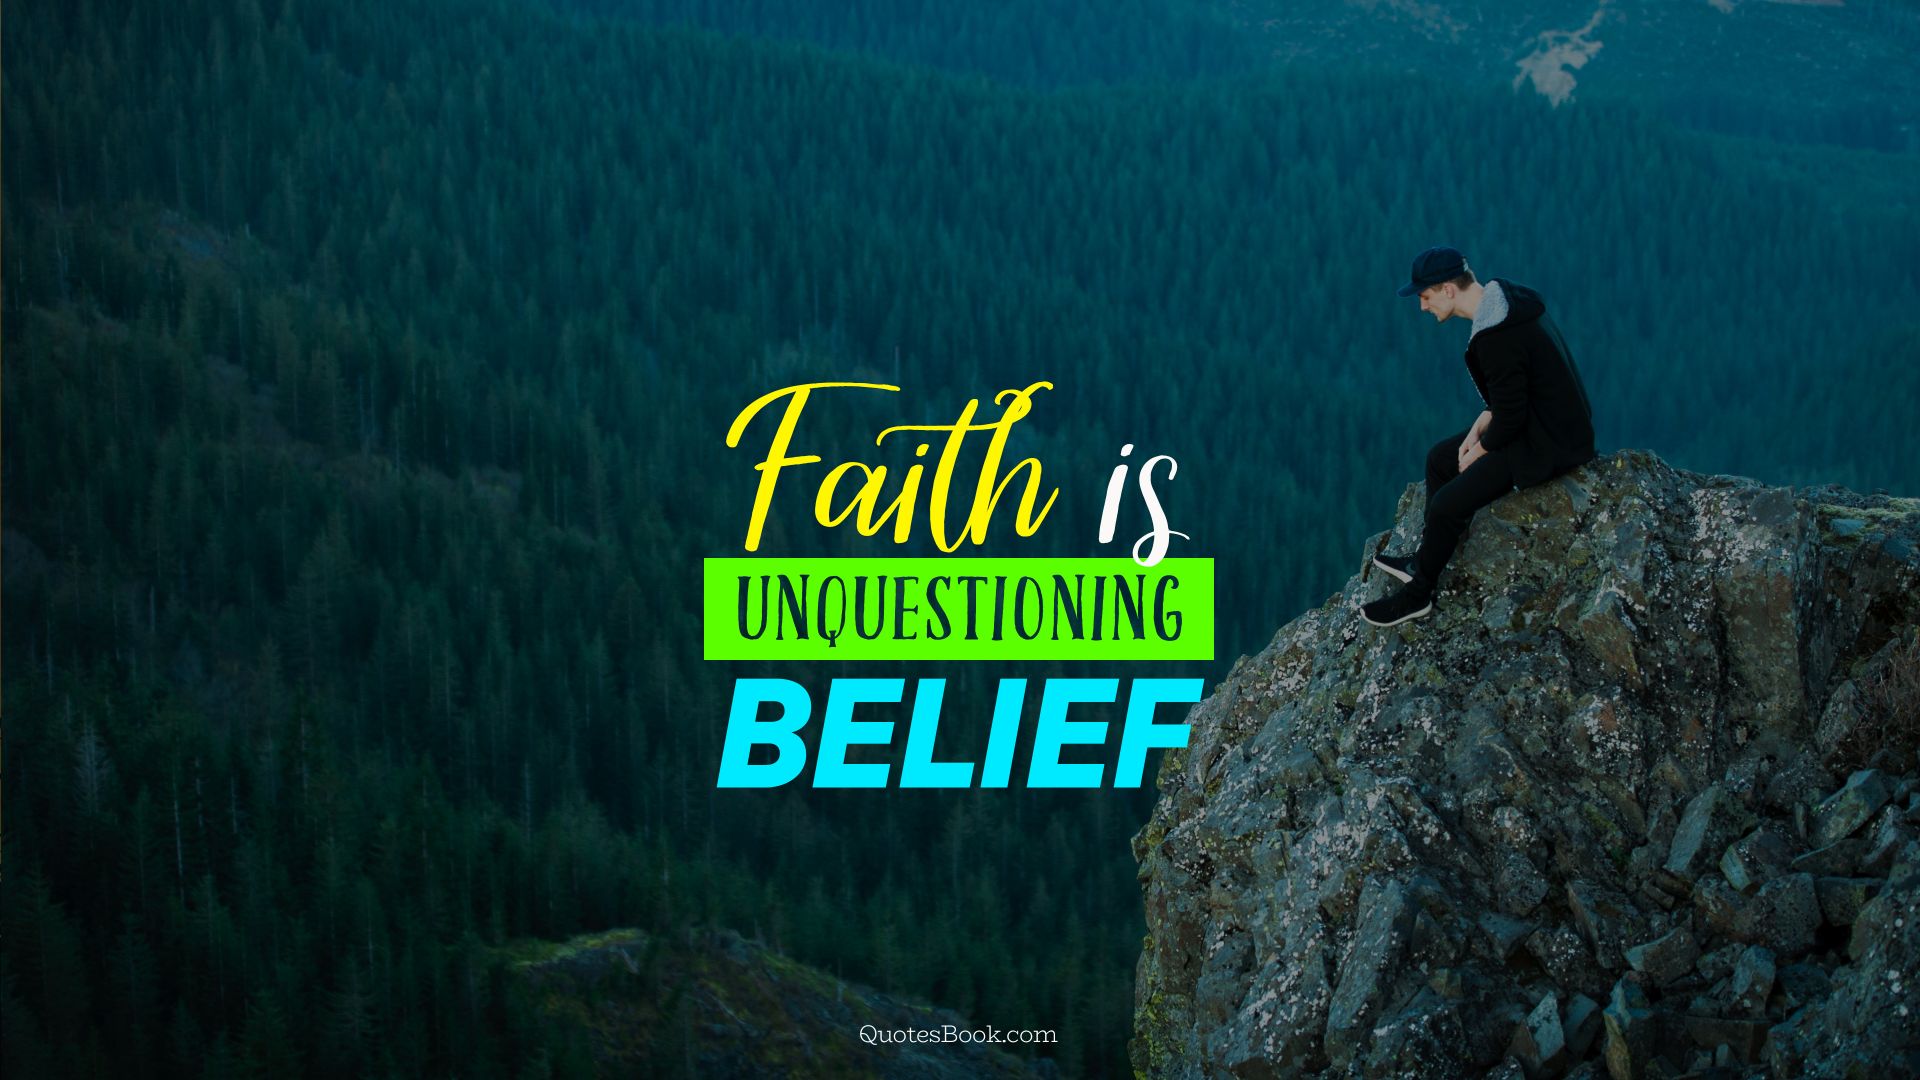 Faith is unquestioning belief